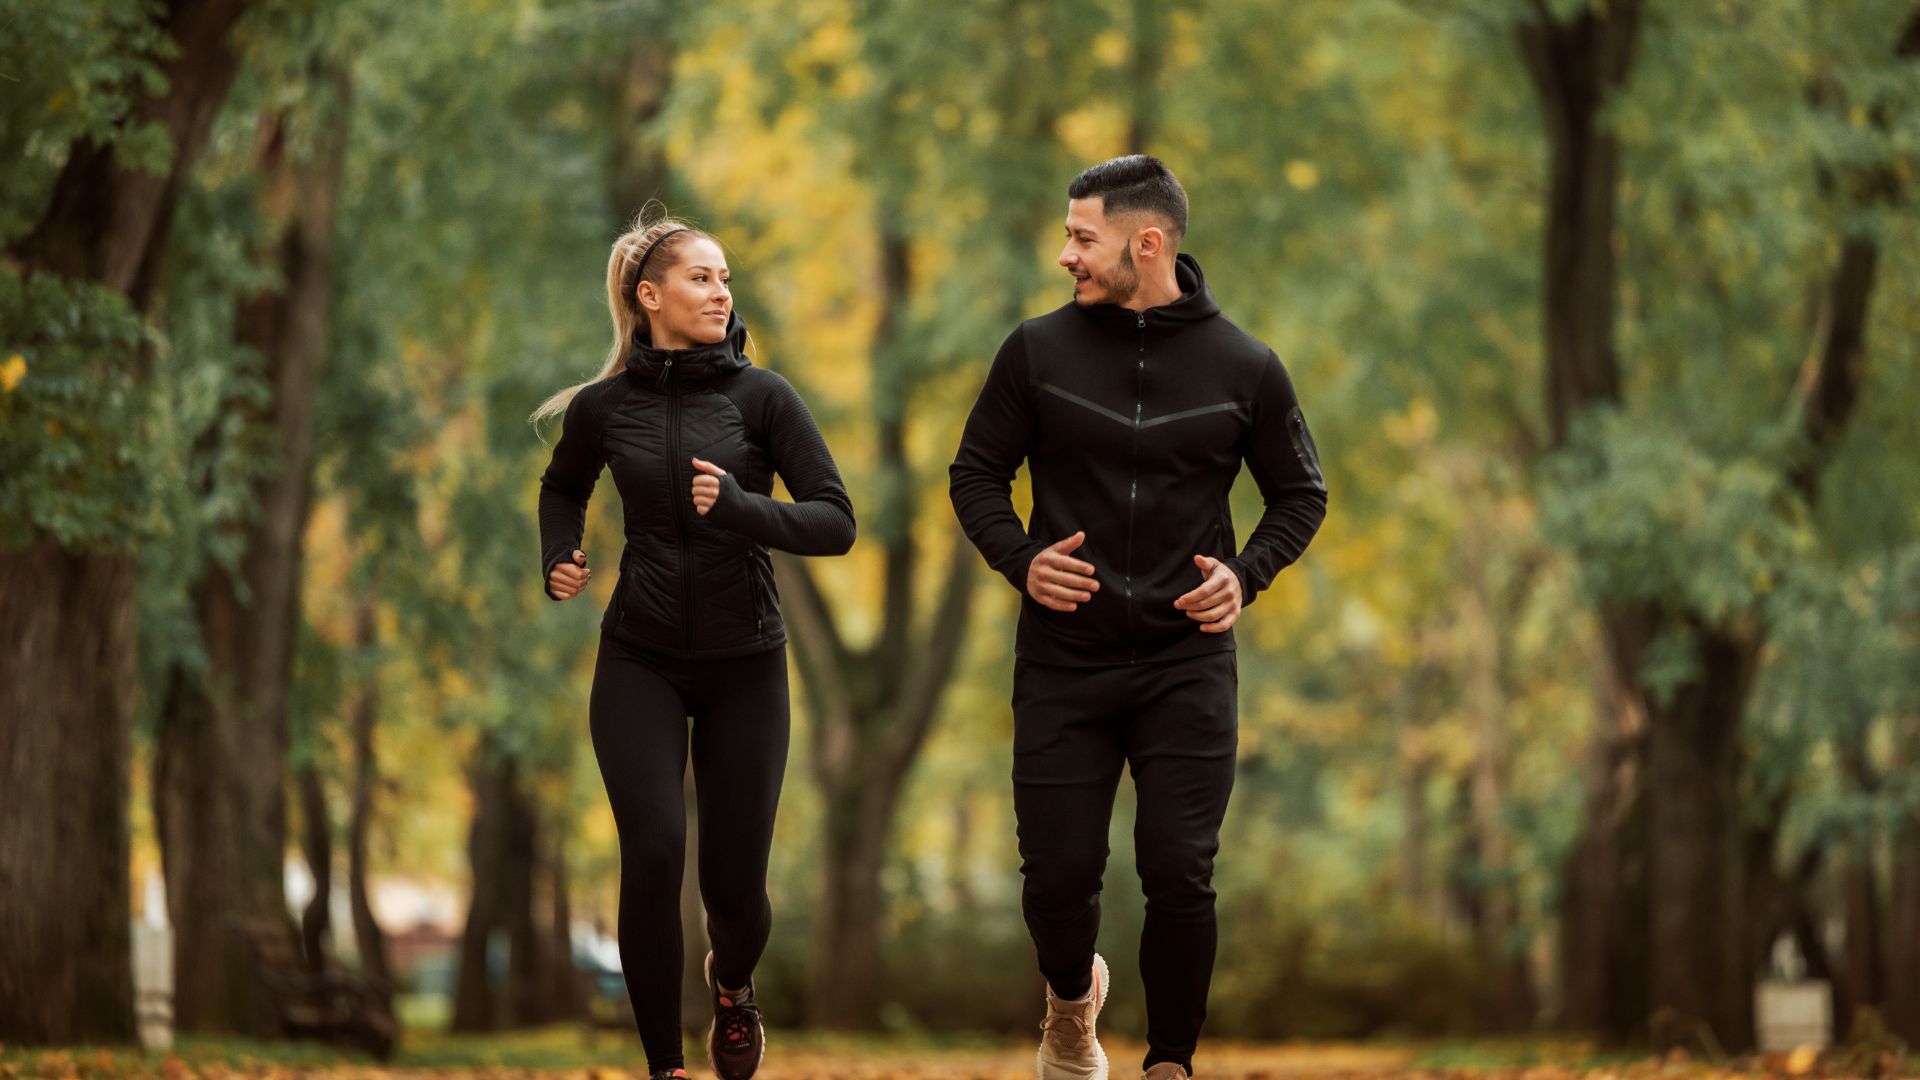 A man and woman jogging in the park.